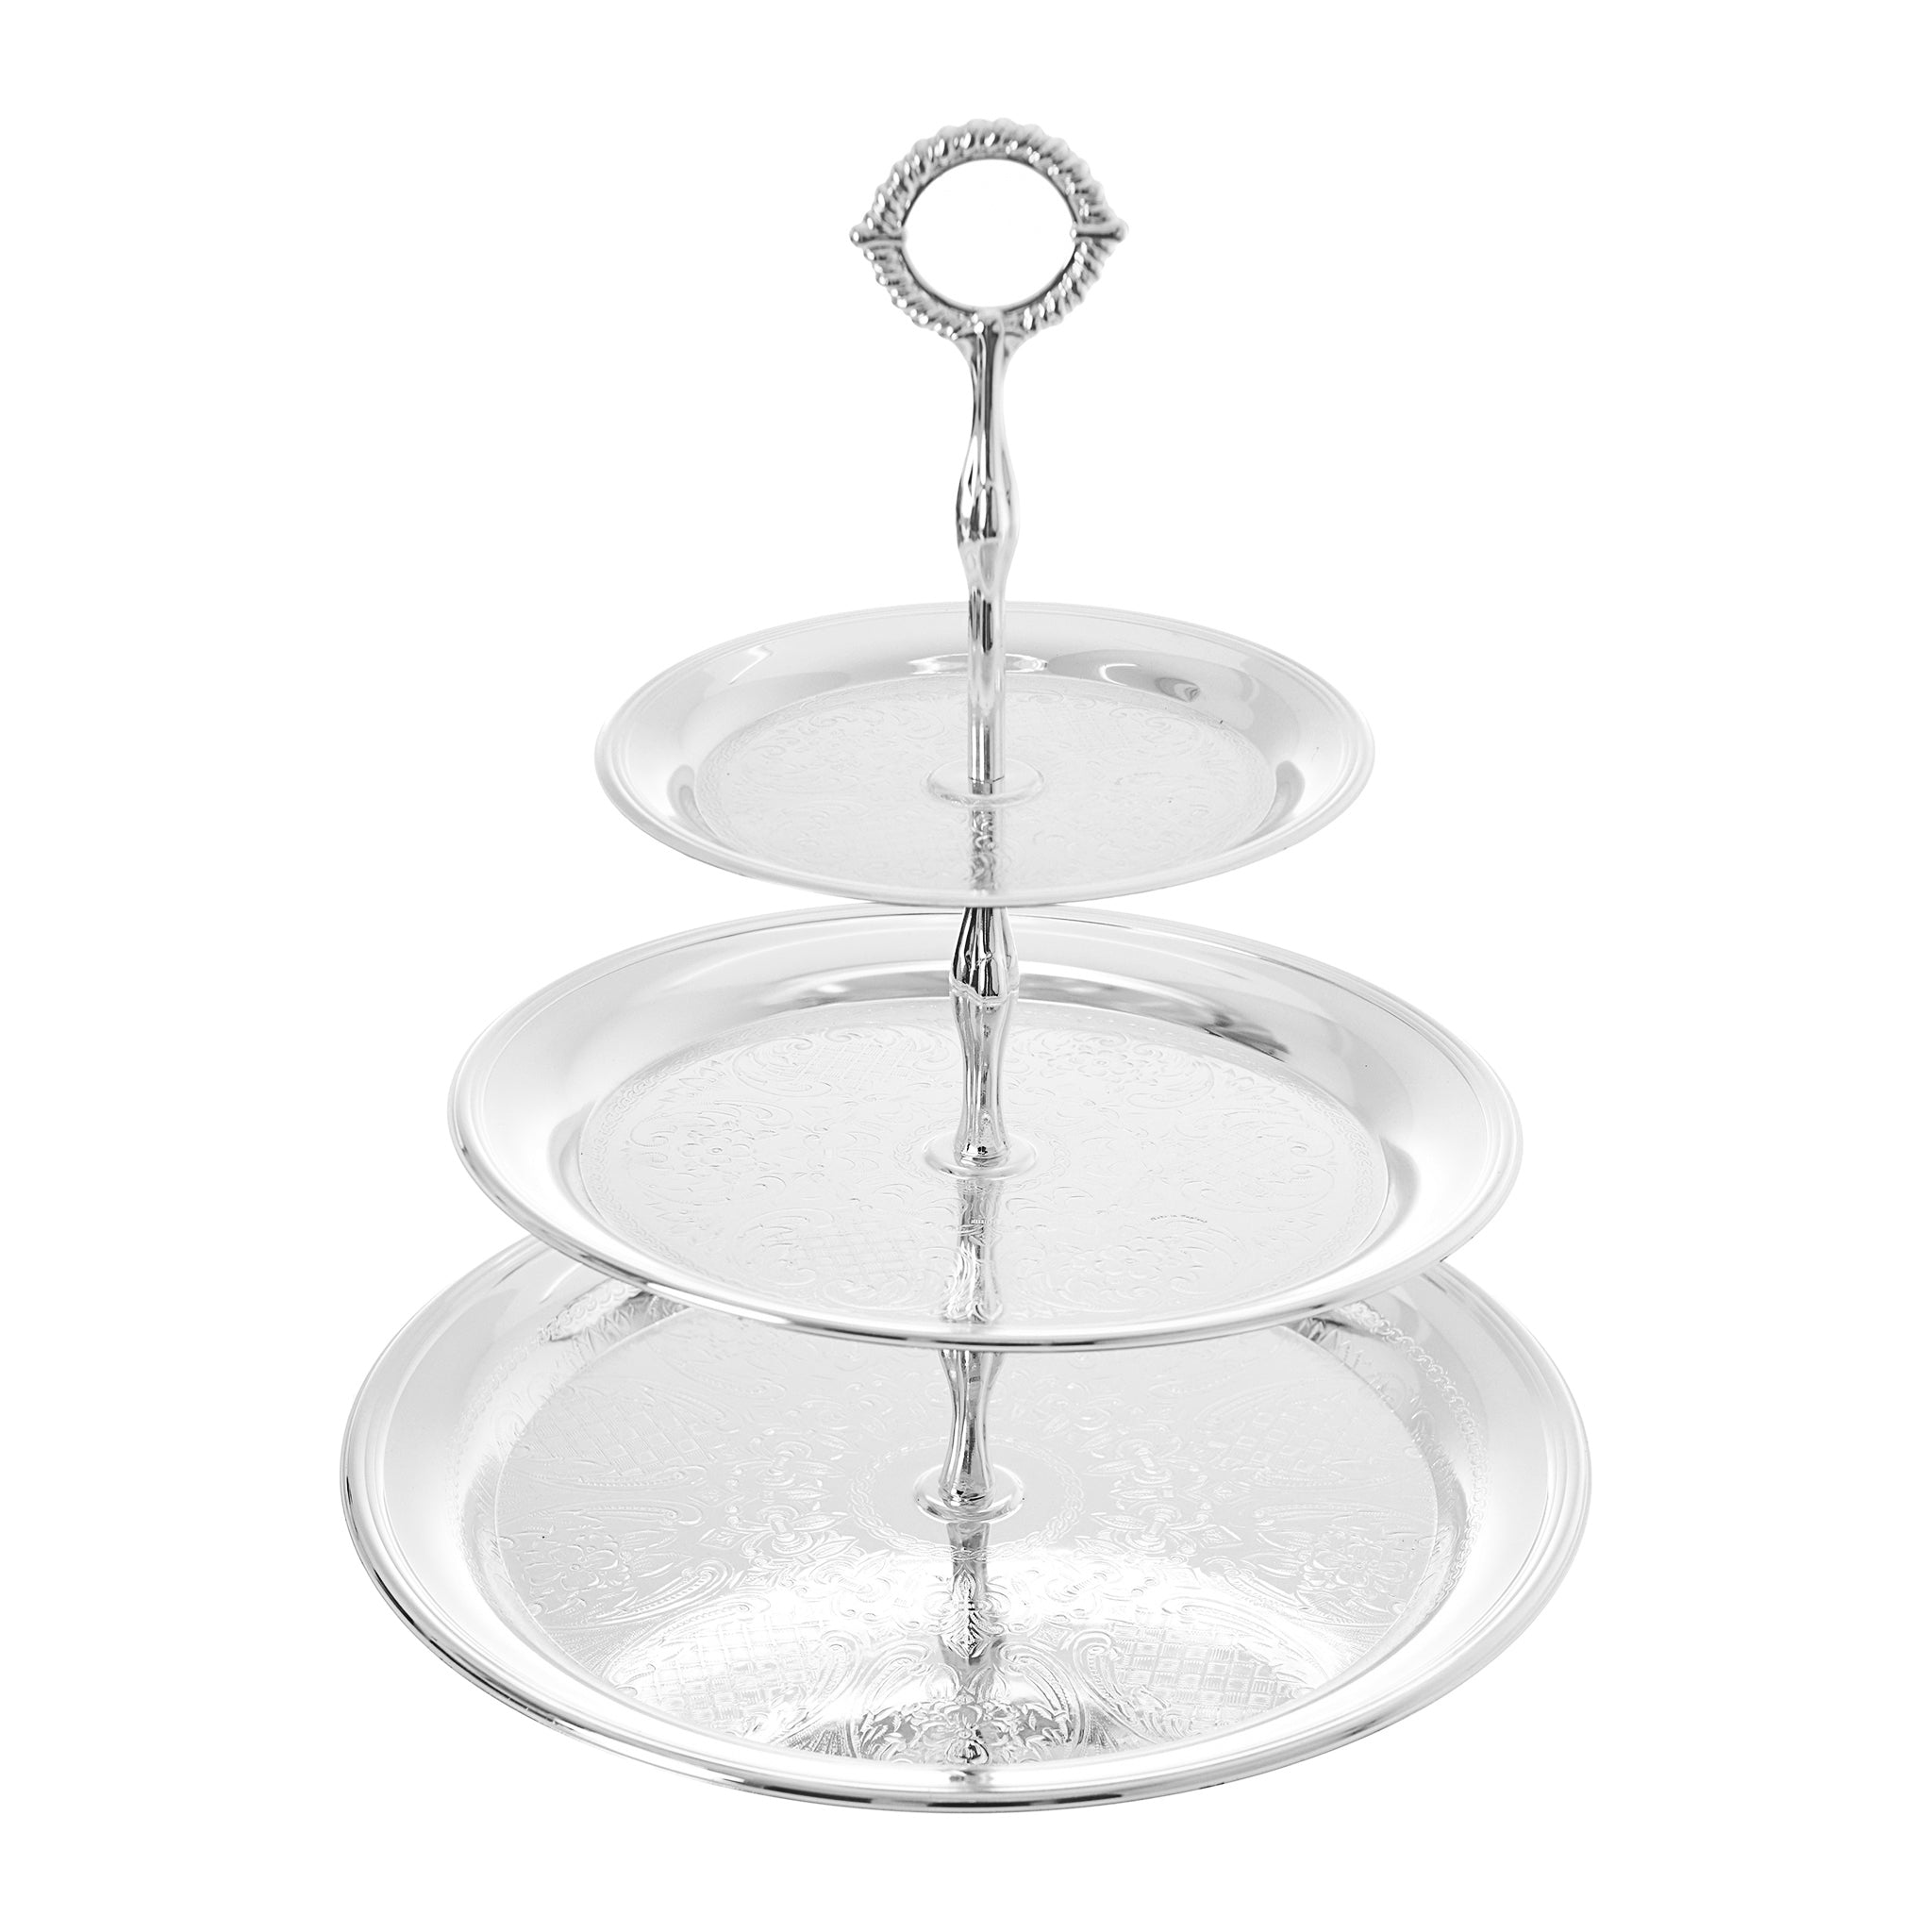 3 Tier Cake Stand Project Kit - Turners Retreat